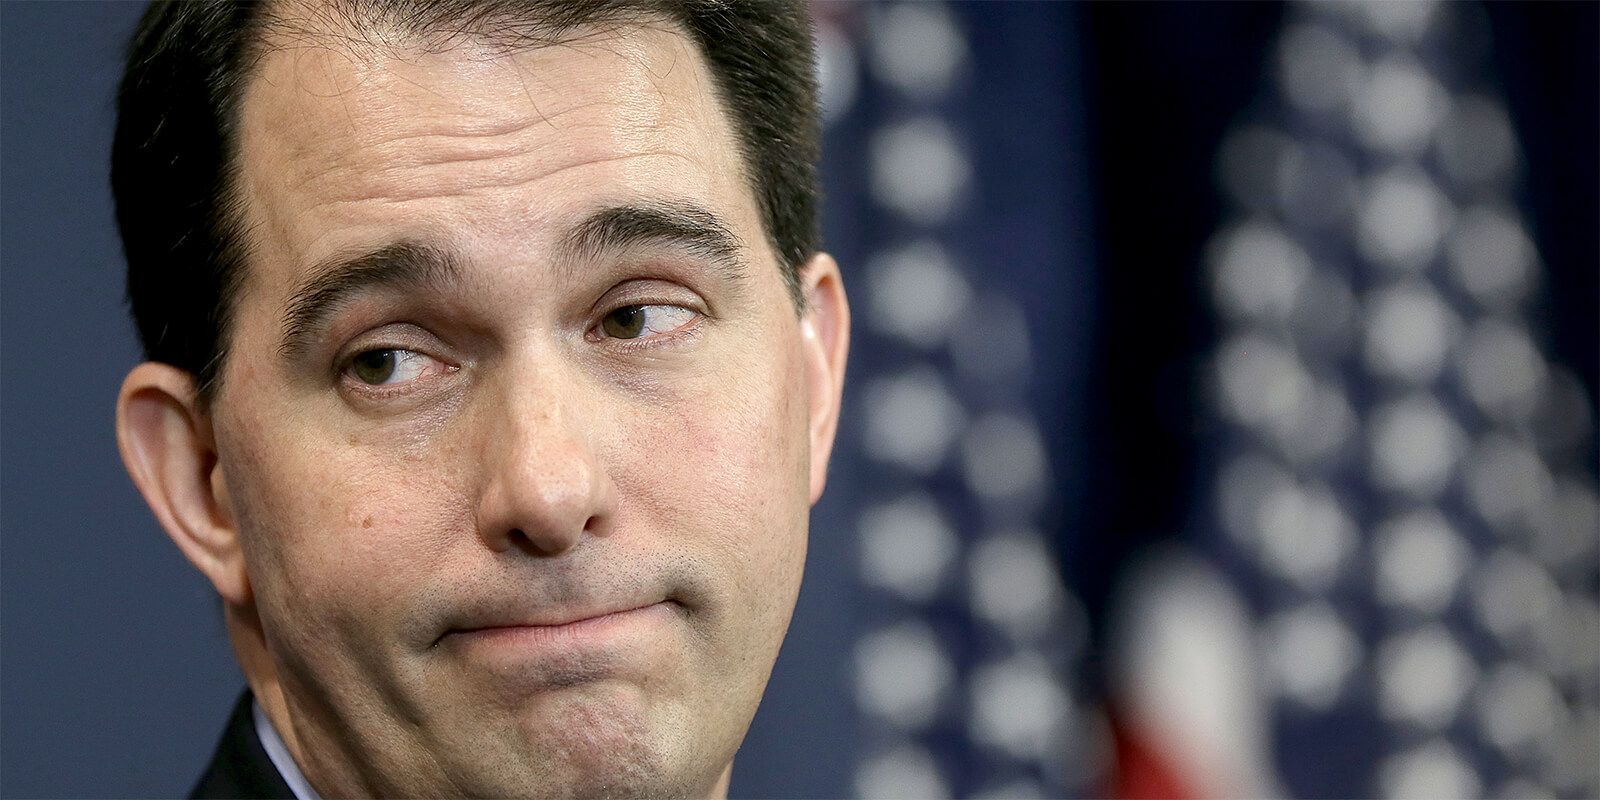 For AFSCME, Walker’s Defeat in Wisconsin Was an Especially Important Victory